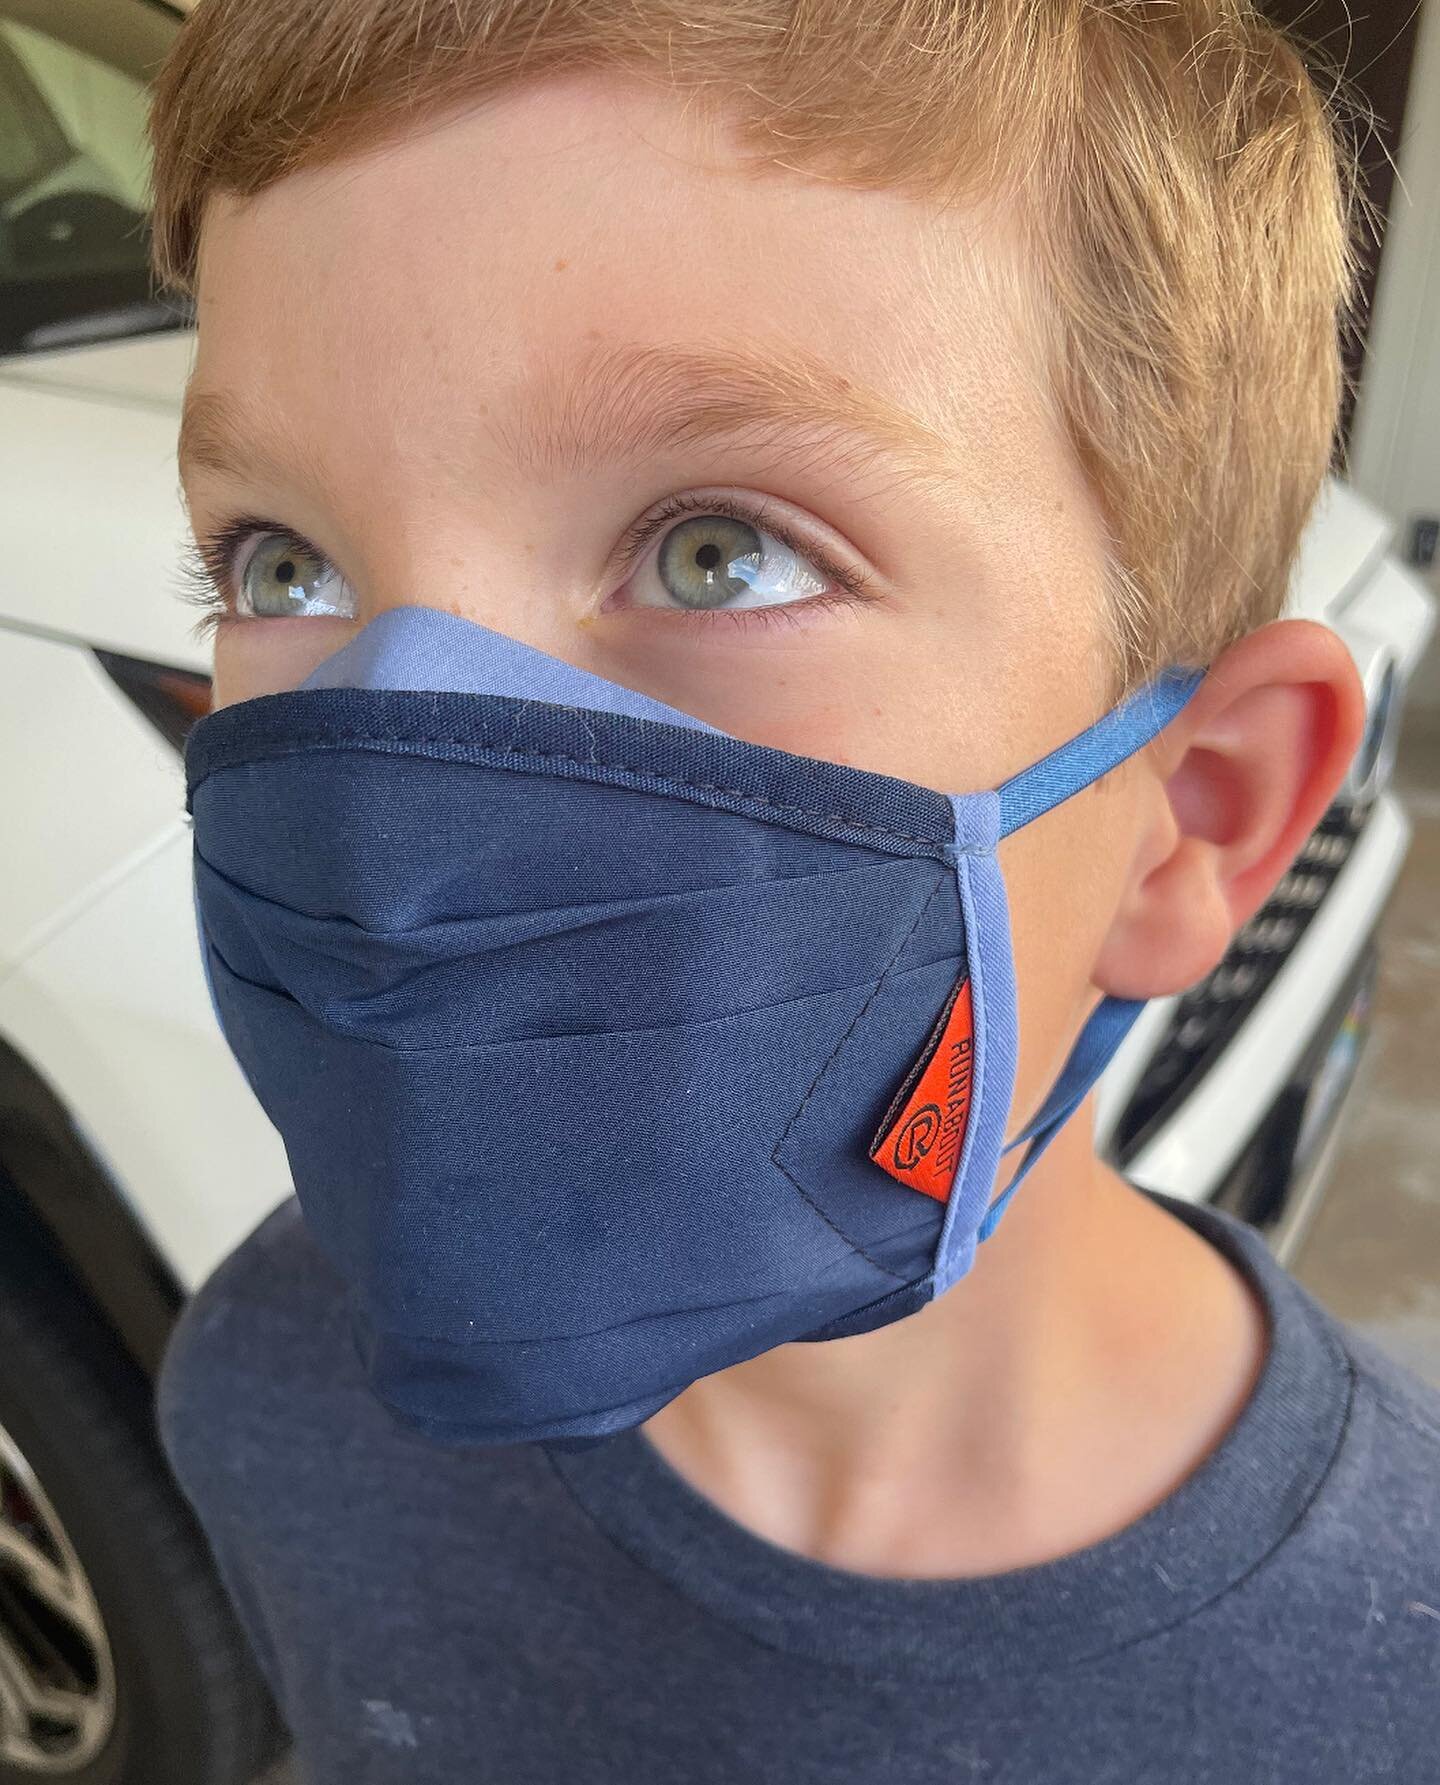 Kiddo masks as worn by Little Jack. Thought we&rsquo;d post a few pics of the normal production Kiddo side by side with our custom one-of-a-kind, WW2 frog-skin camo parachute material Kiddo we made for Jack since his favorite color is &ldquo;camo&rdq